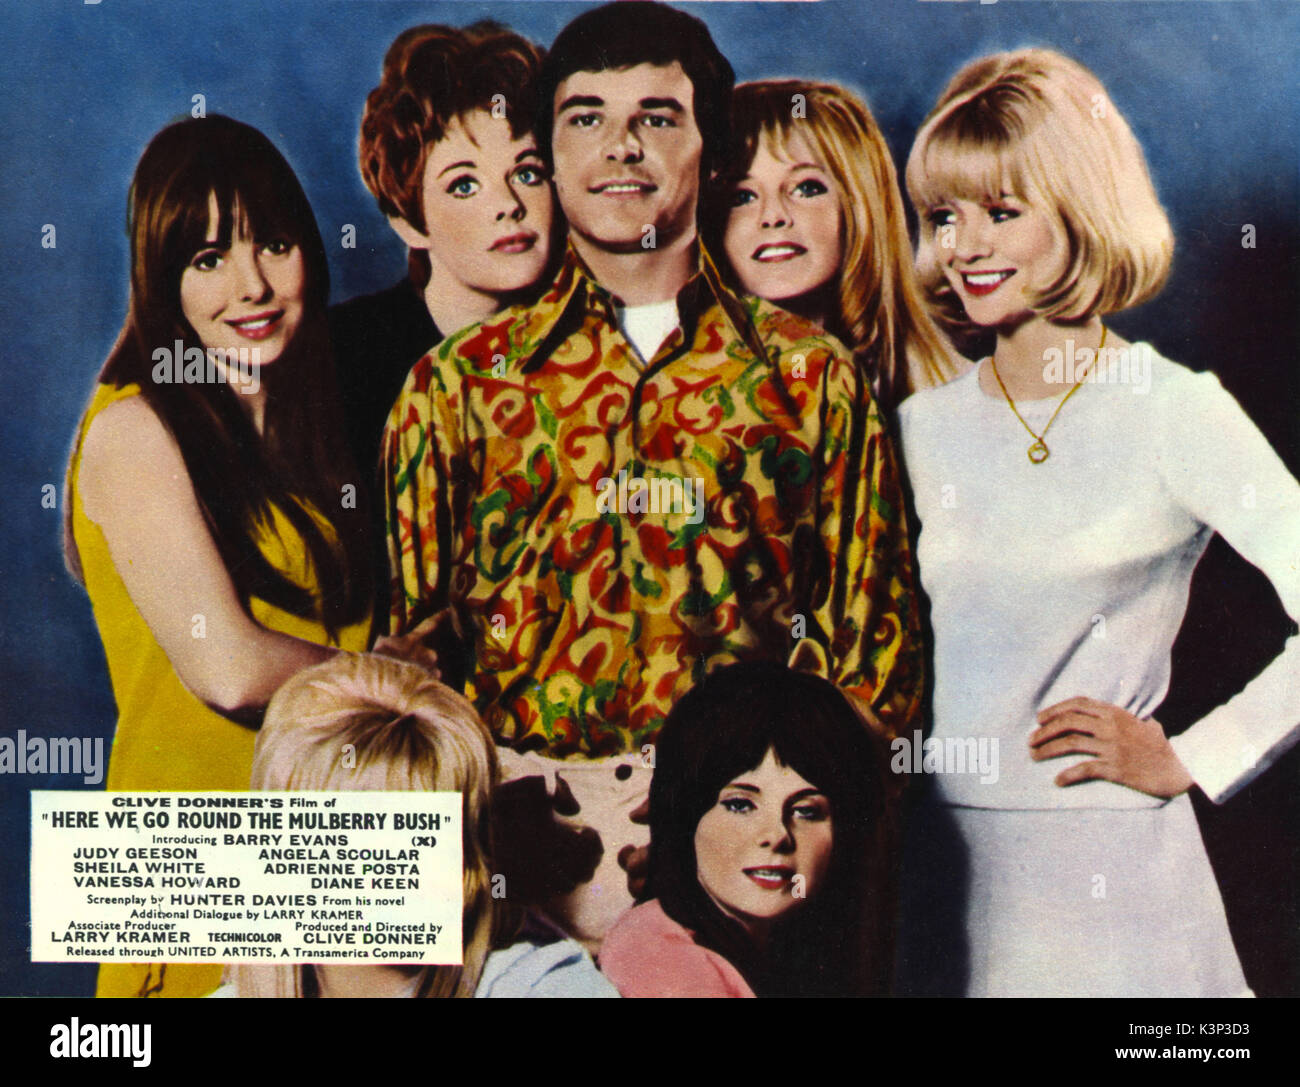 HERE WE GO ROUND THE MULBERRY BUSH [BR 1967] [L - R hintere Reihe] [?], ANGELA SCOULAR, Barry Evans, [?], JUDY GEESON Datum: 1967 Stockfoto